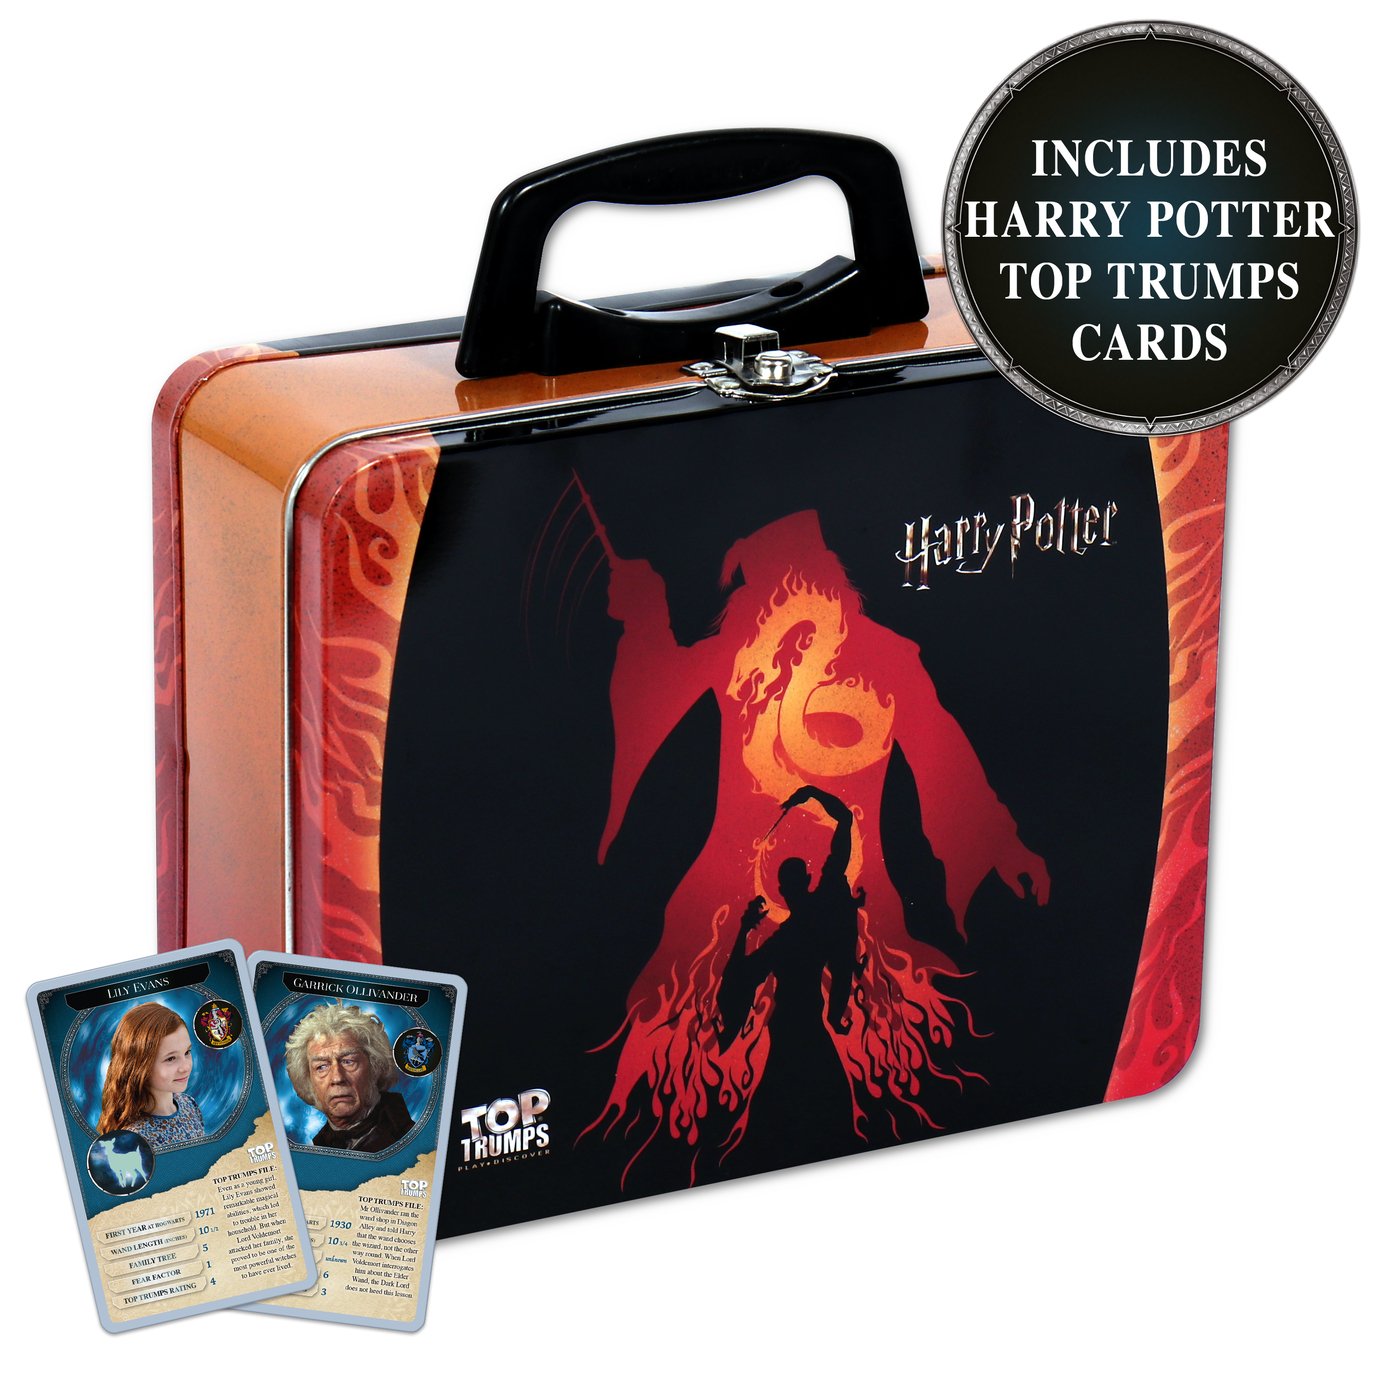 Top Trumps Harry Potter Wizard & Witches Game Review